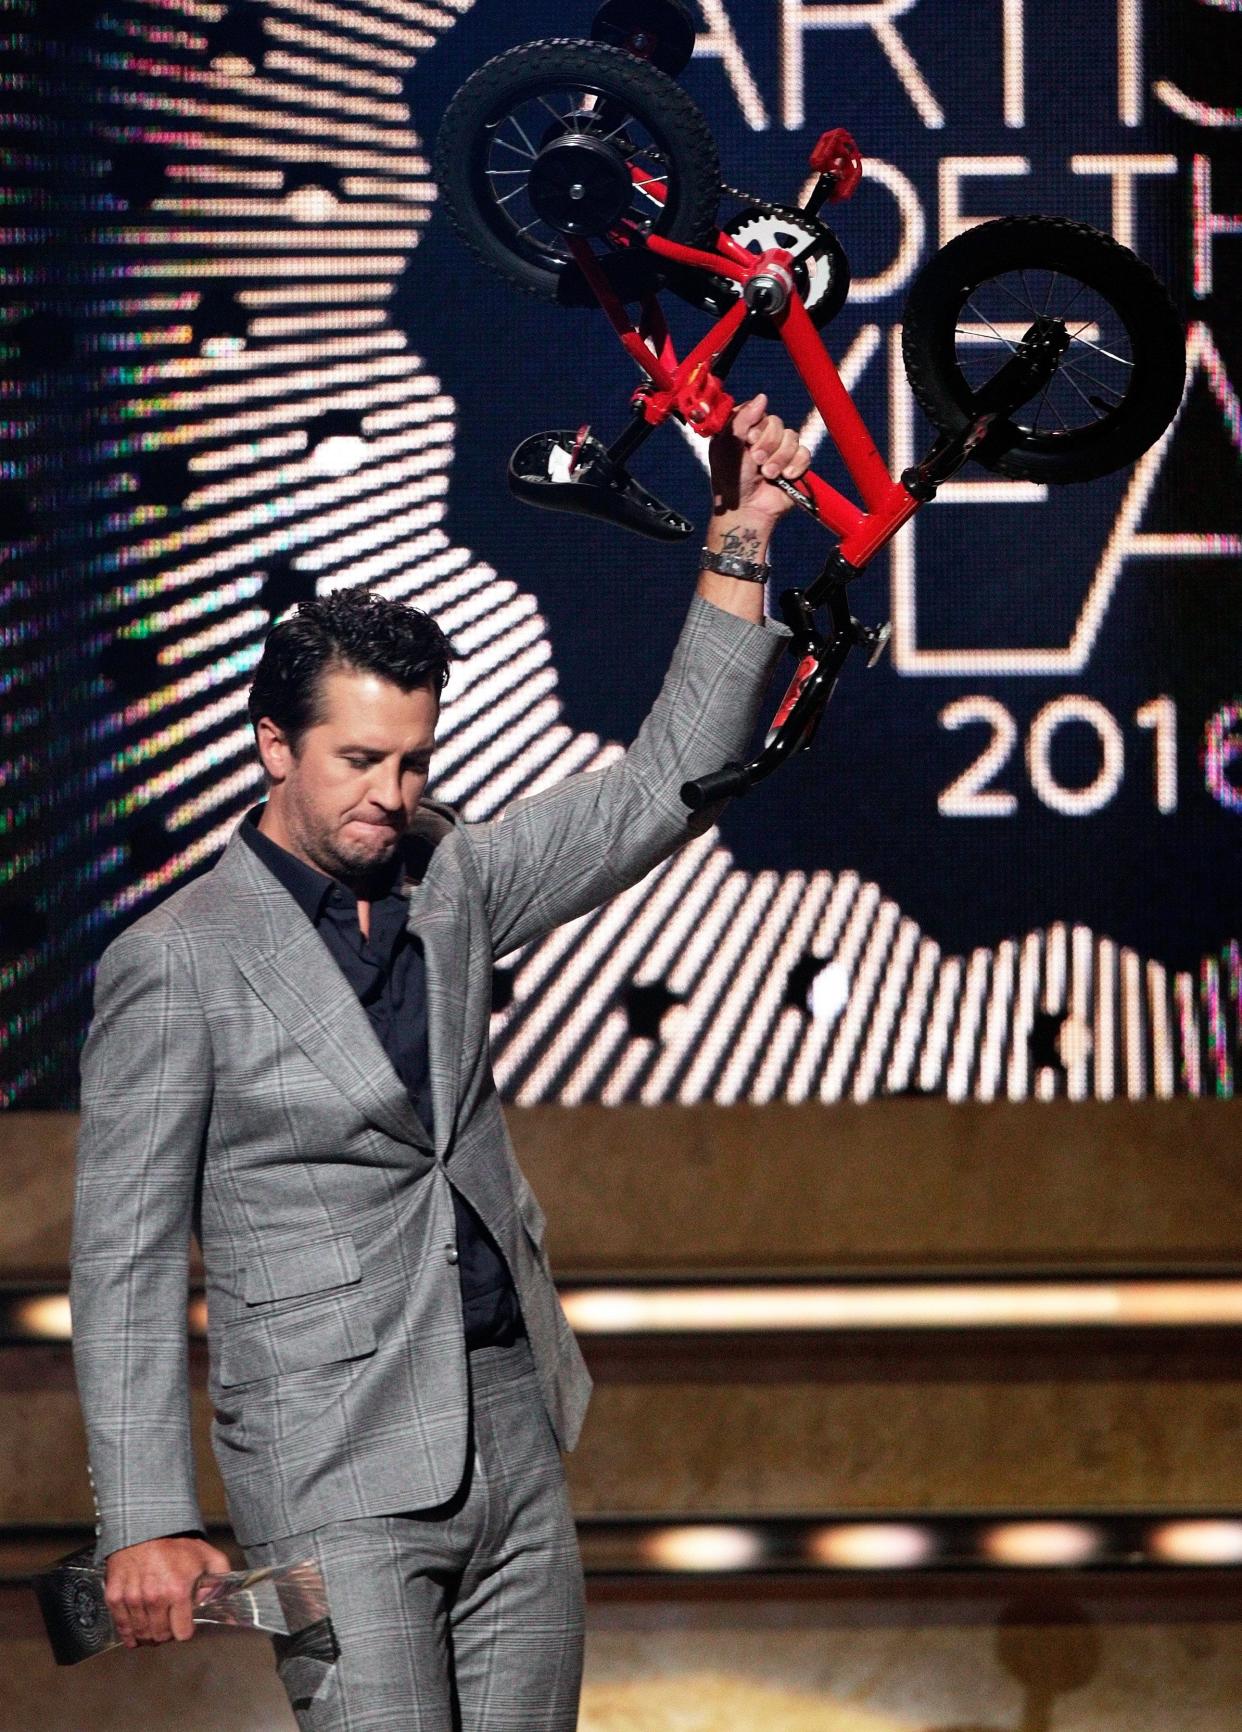 Luke Bryan holds up a small bicycle after being presented the CMT Artists of the Year awards show at the Schermerhorn Symphony Center on Wednesday, Oct. 19, 2016, in Nashville, Tenn. (Photo by Wade Payne/Invision/AP)